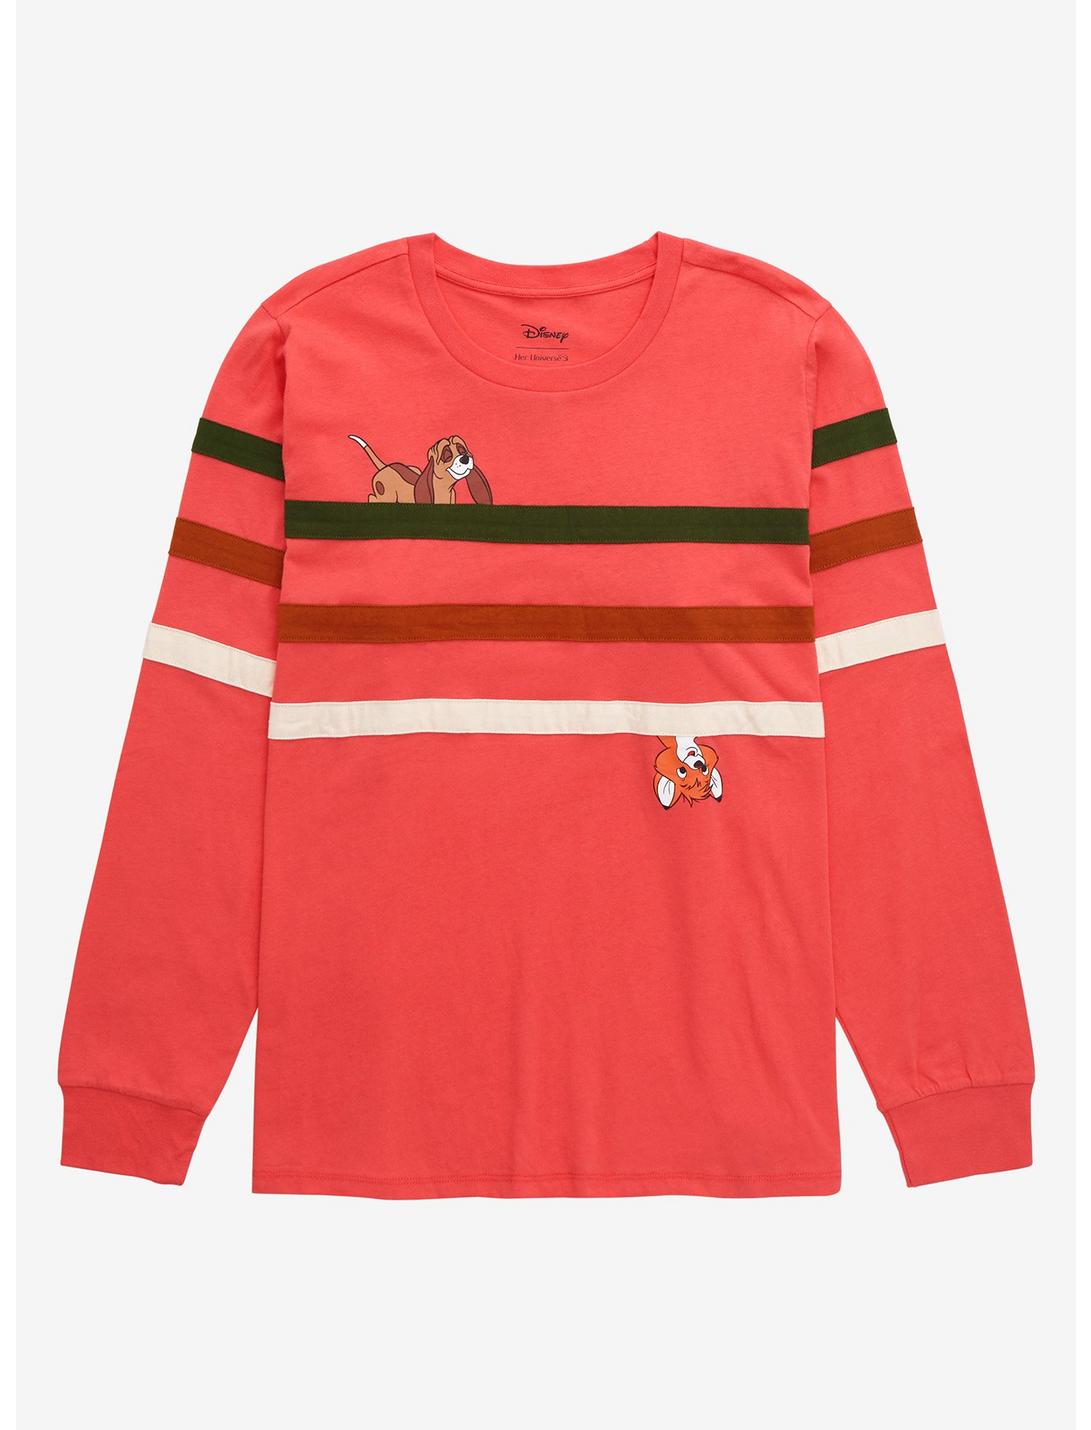 Our Universe Disney The Fox and the Hound Striped Plus Size Long Sleeve T-Shirt - BoxLunch Exclusive, CORAL, hi-res